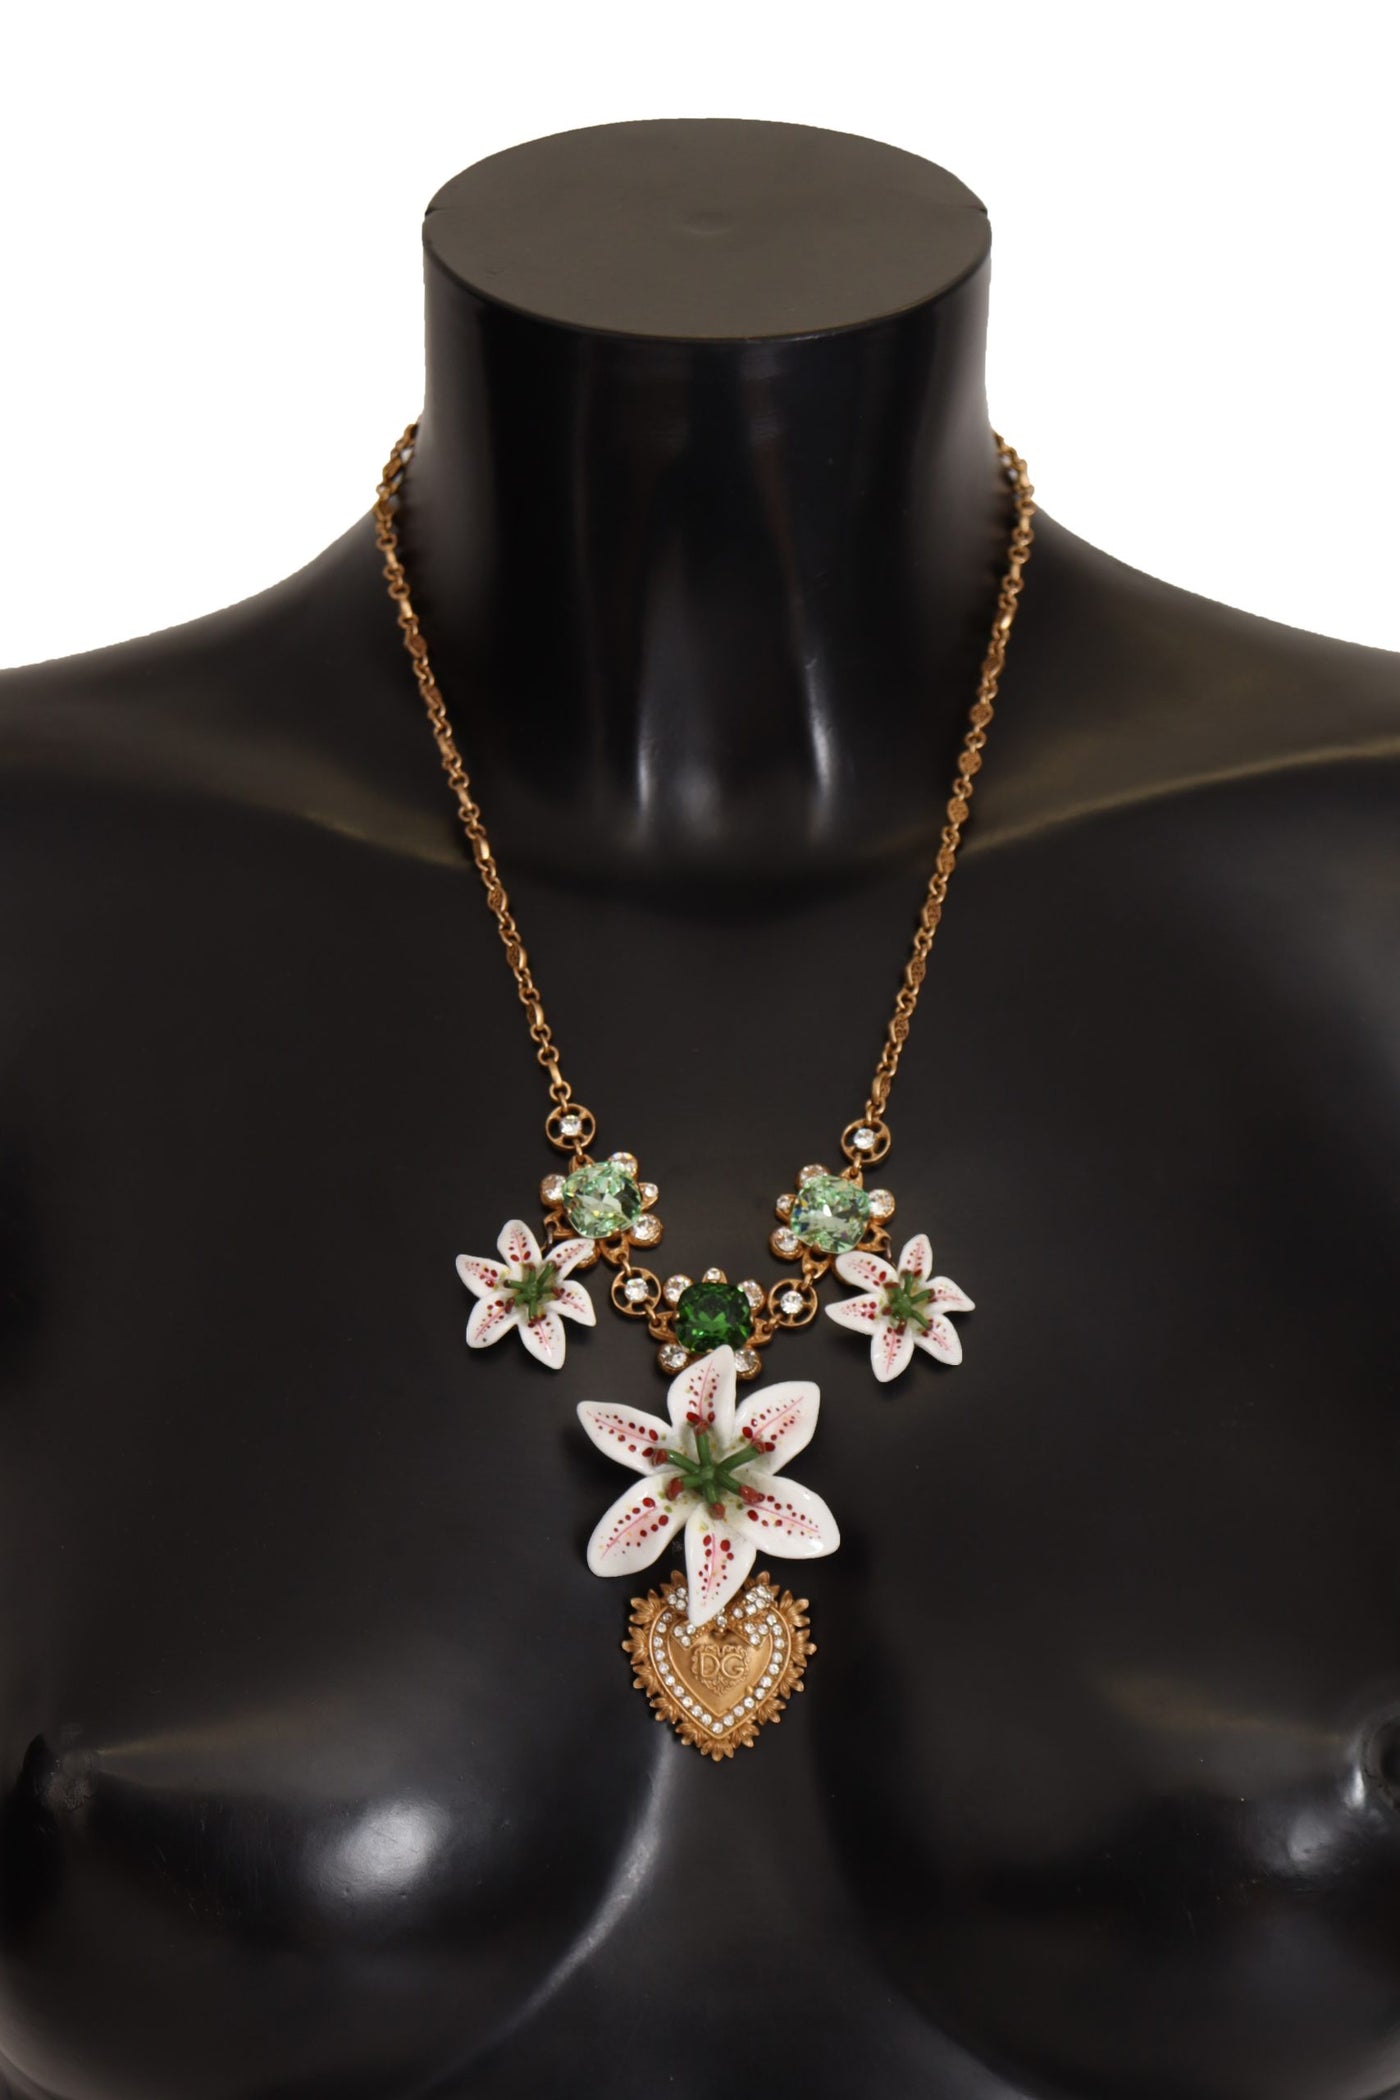 Gold Brass AMORE Heart Crystal Pendant Floral Necklace